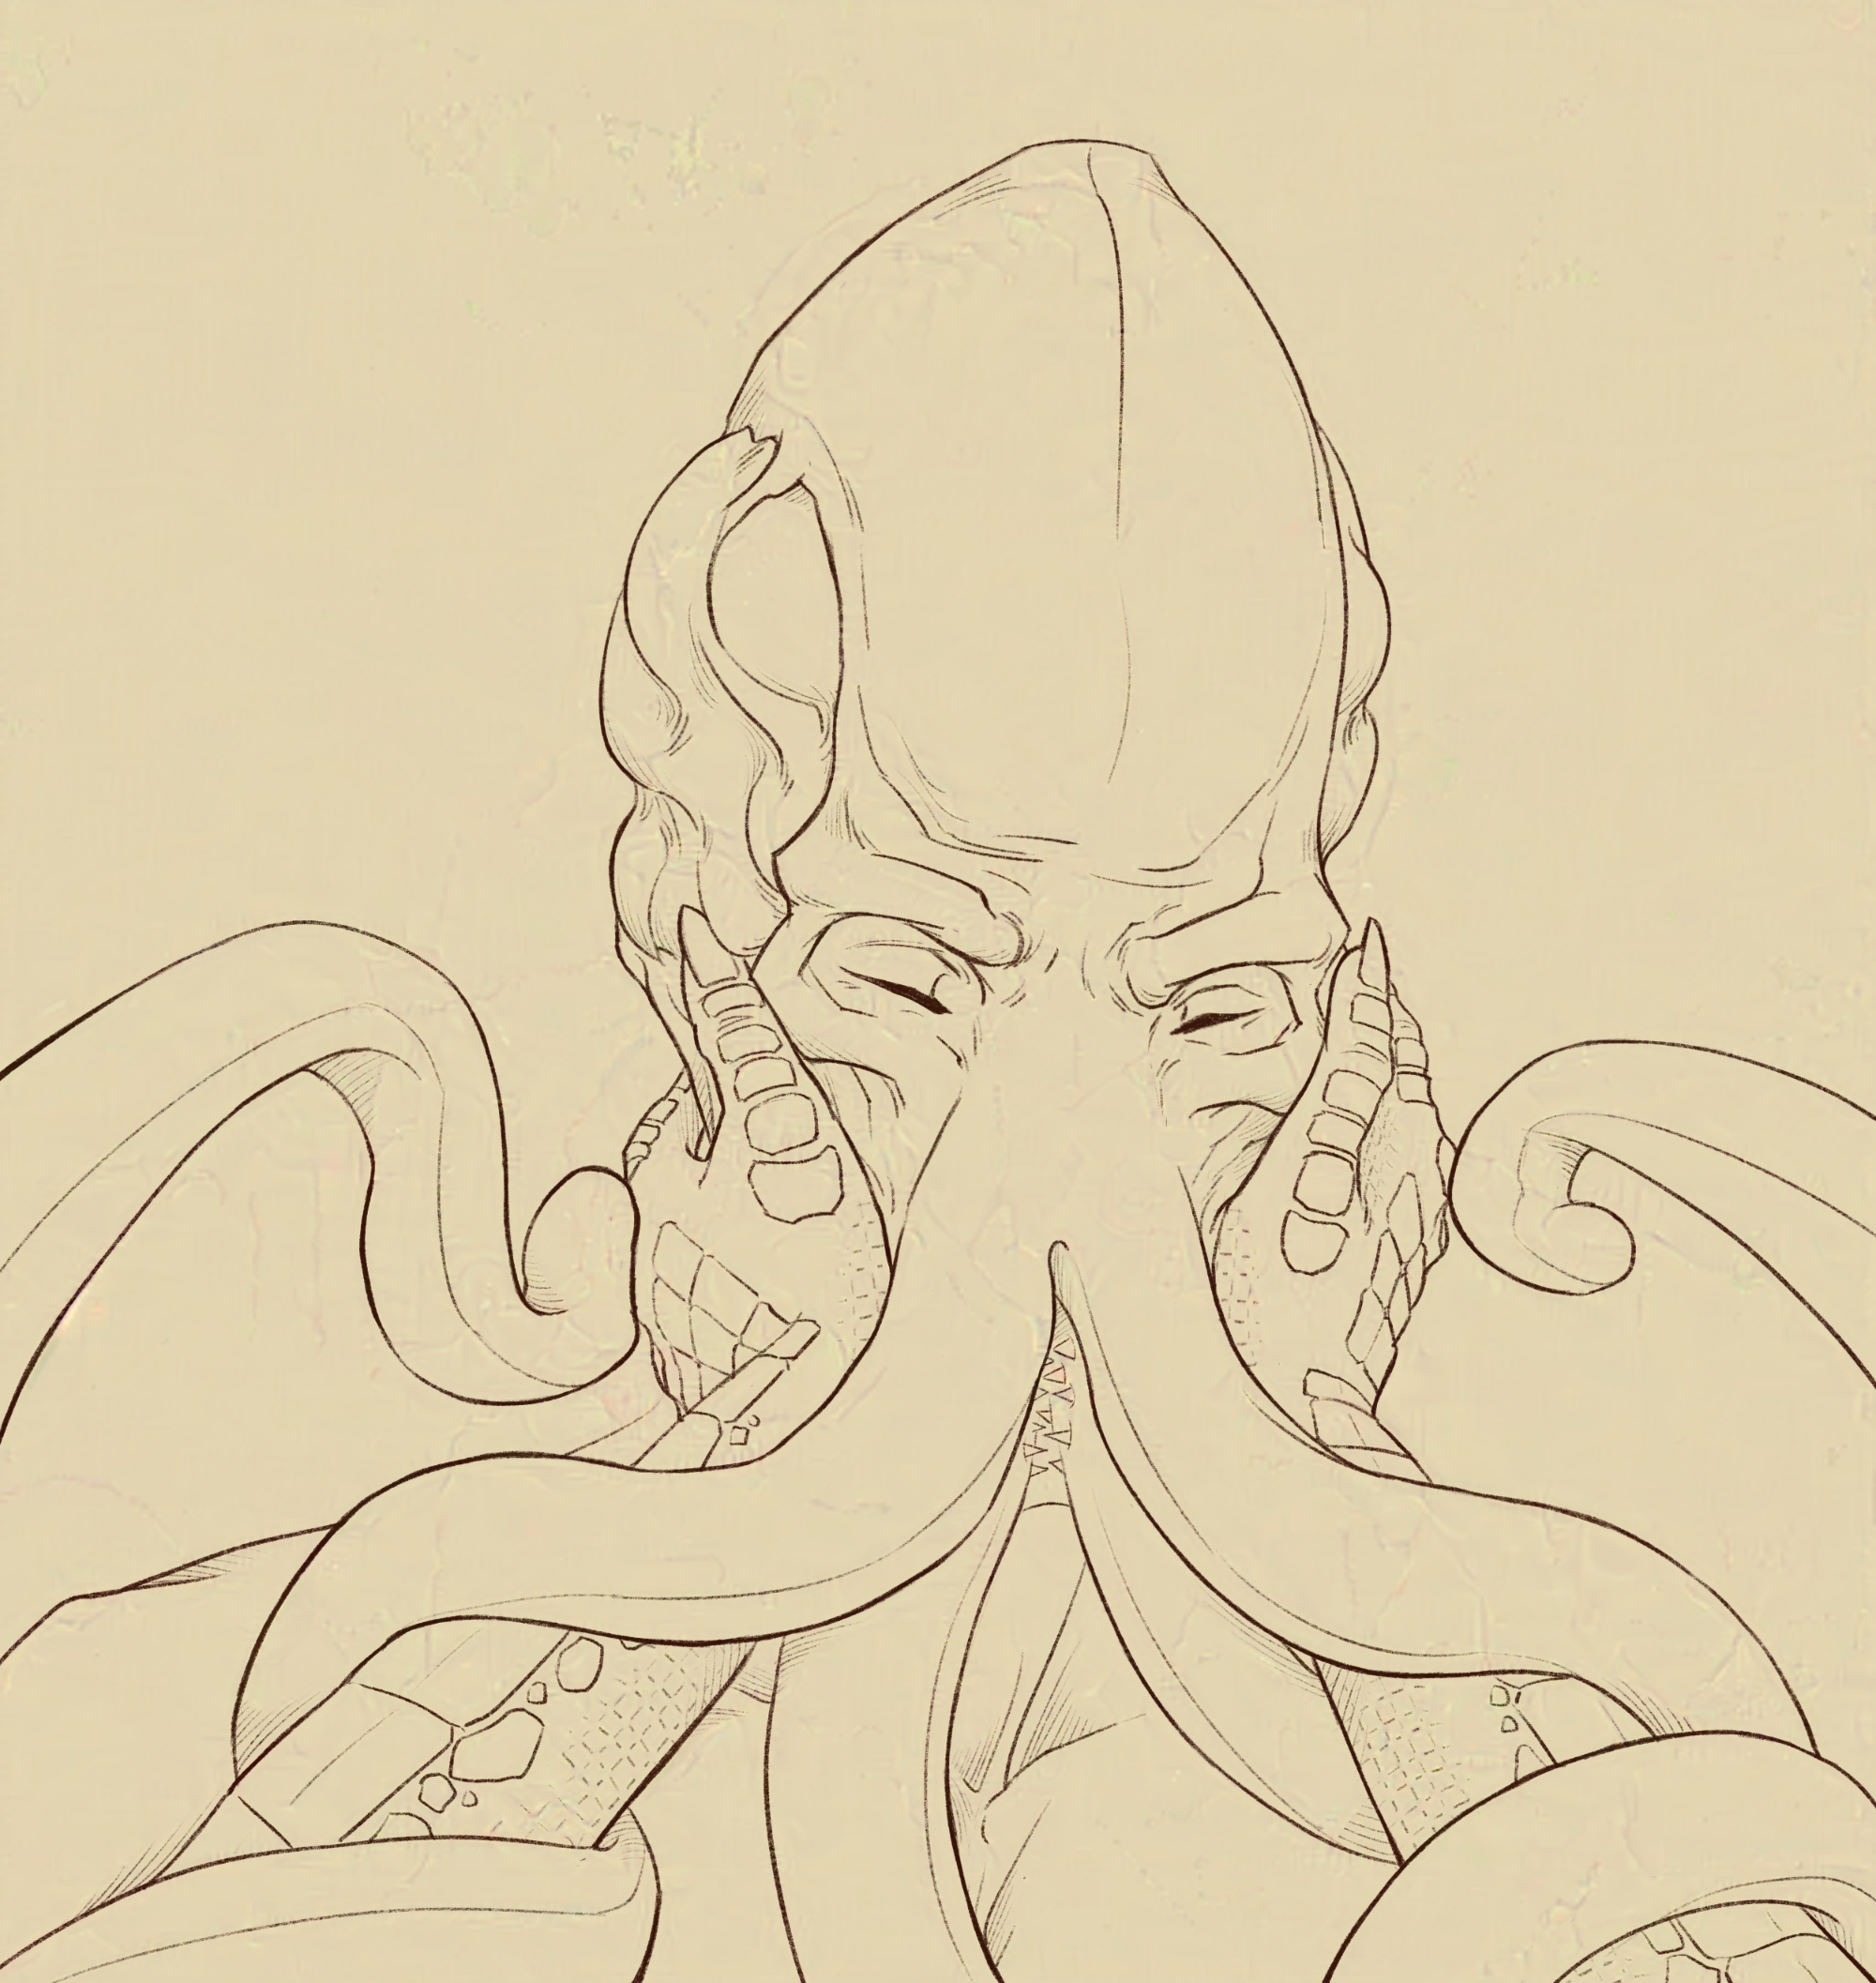 A close-up of the Emperor's face (an illithid), with its eyes closed and his expression soft and content, as its cheeks are gently held by a pair of Dragonborn hands. Its tentacles are wrapped around the Dragonborn's arms, and the tips of two tentacle are touching the hands on both sides respectively.